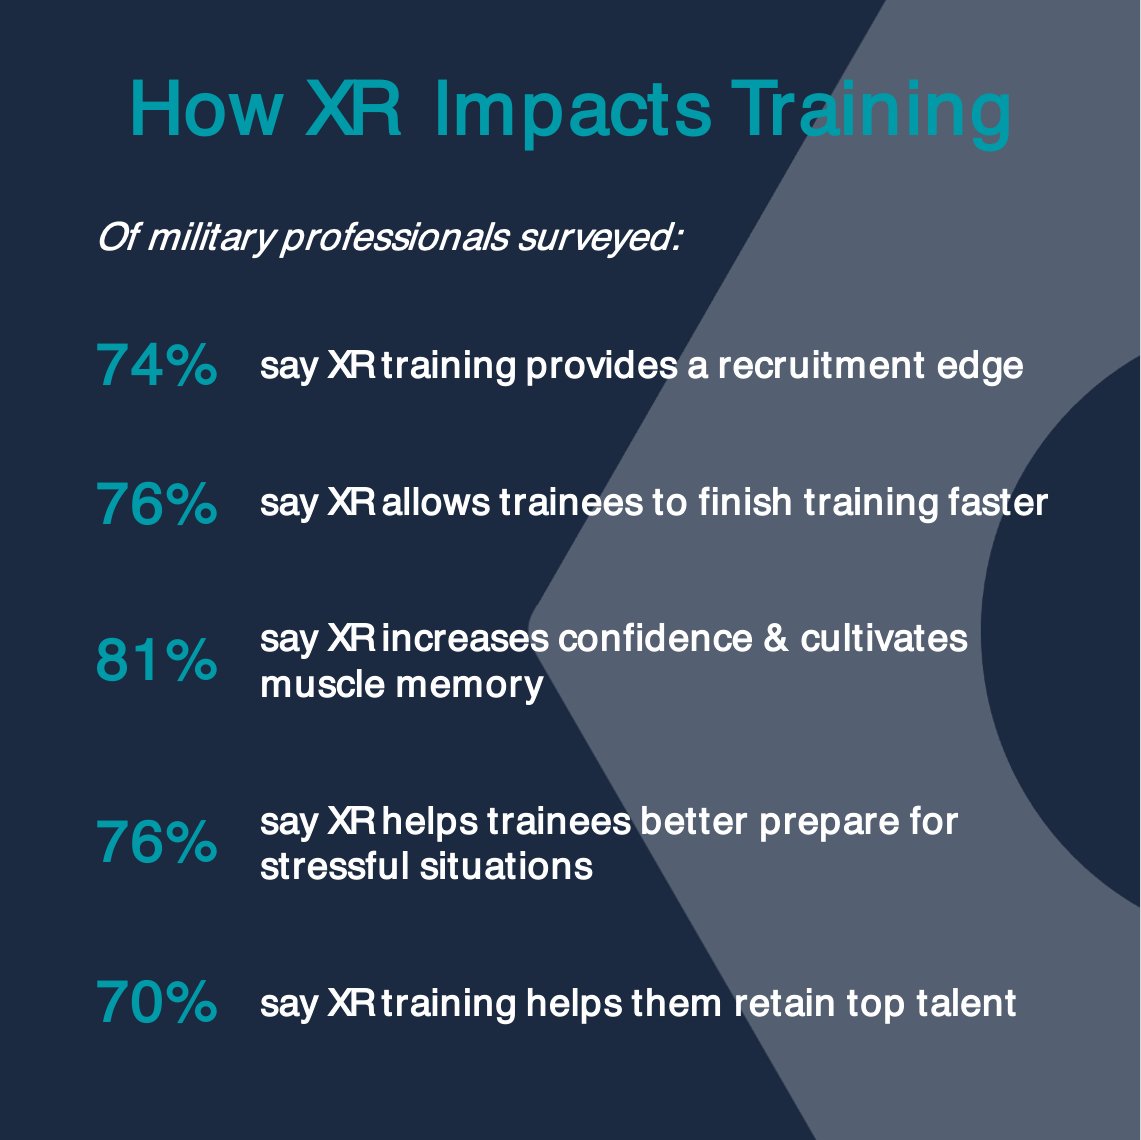 #XR provides a safe, cost-effective way to scale highly complex training according to a 2023 study of training professionals across the US Armed Forces by @htcvive. For the latest trends in technical training, download the full report here: biltapp.com/technical-trai… #work #training